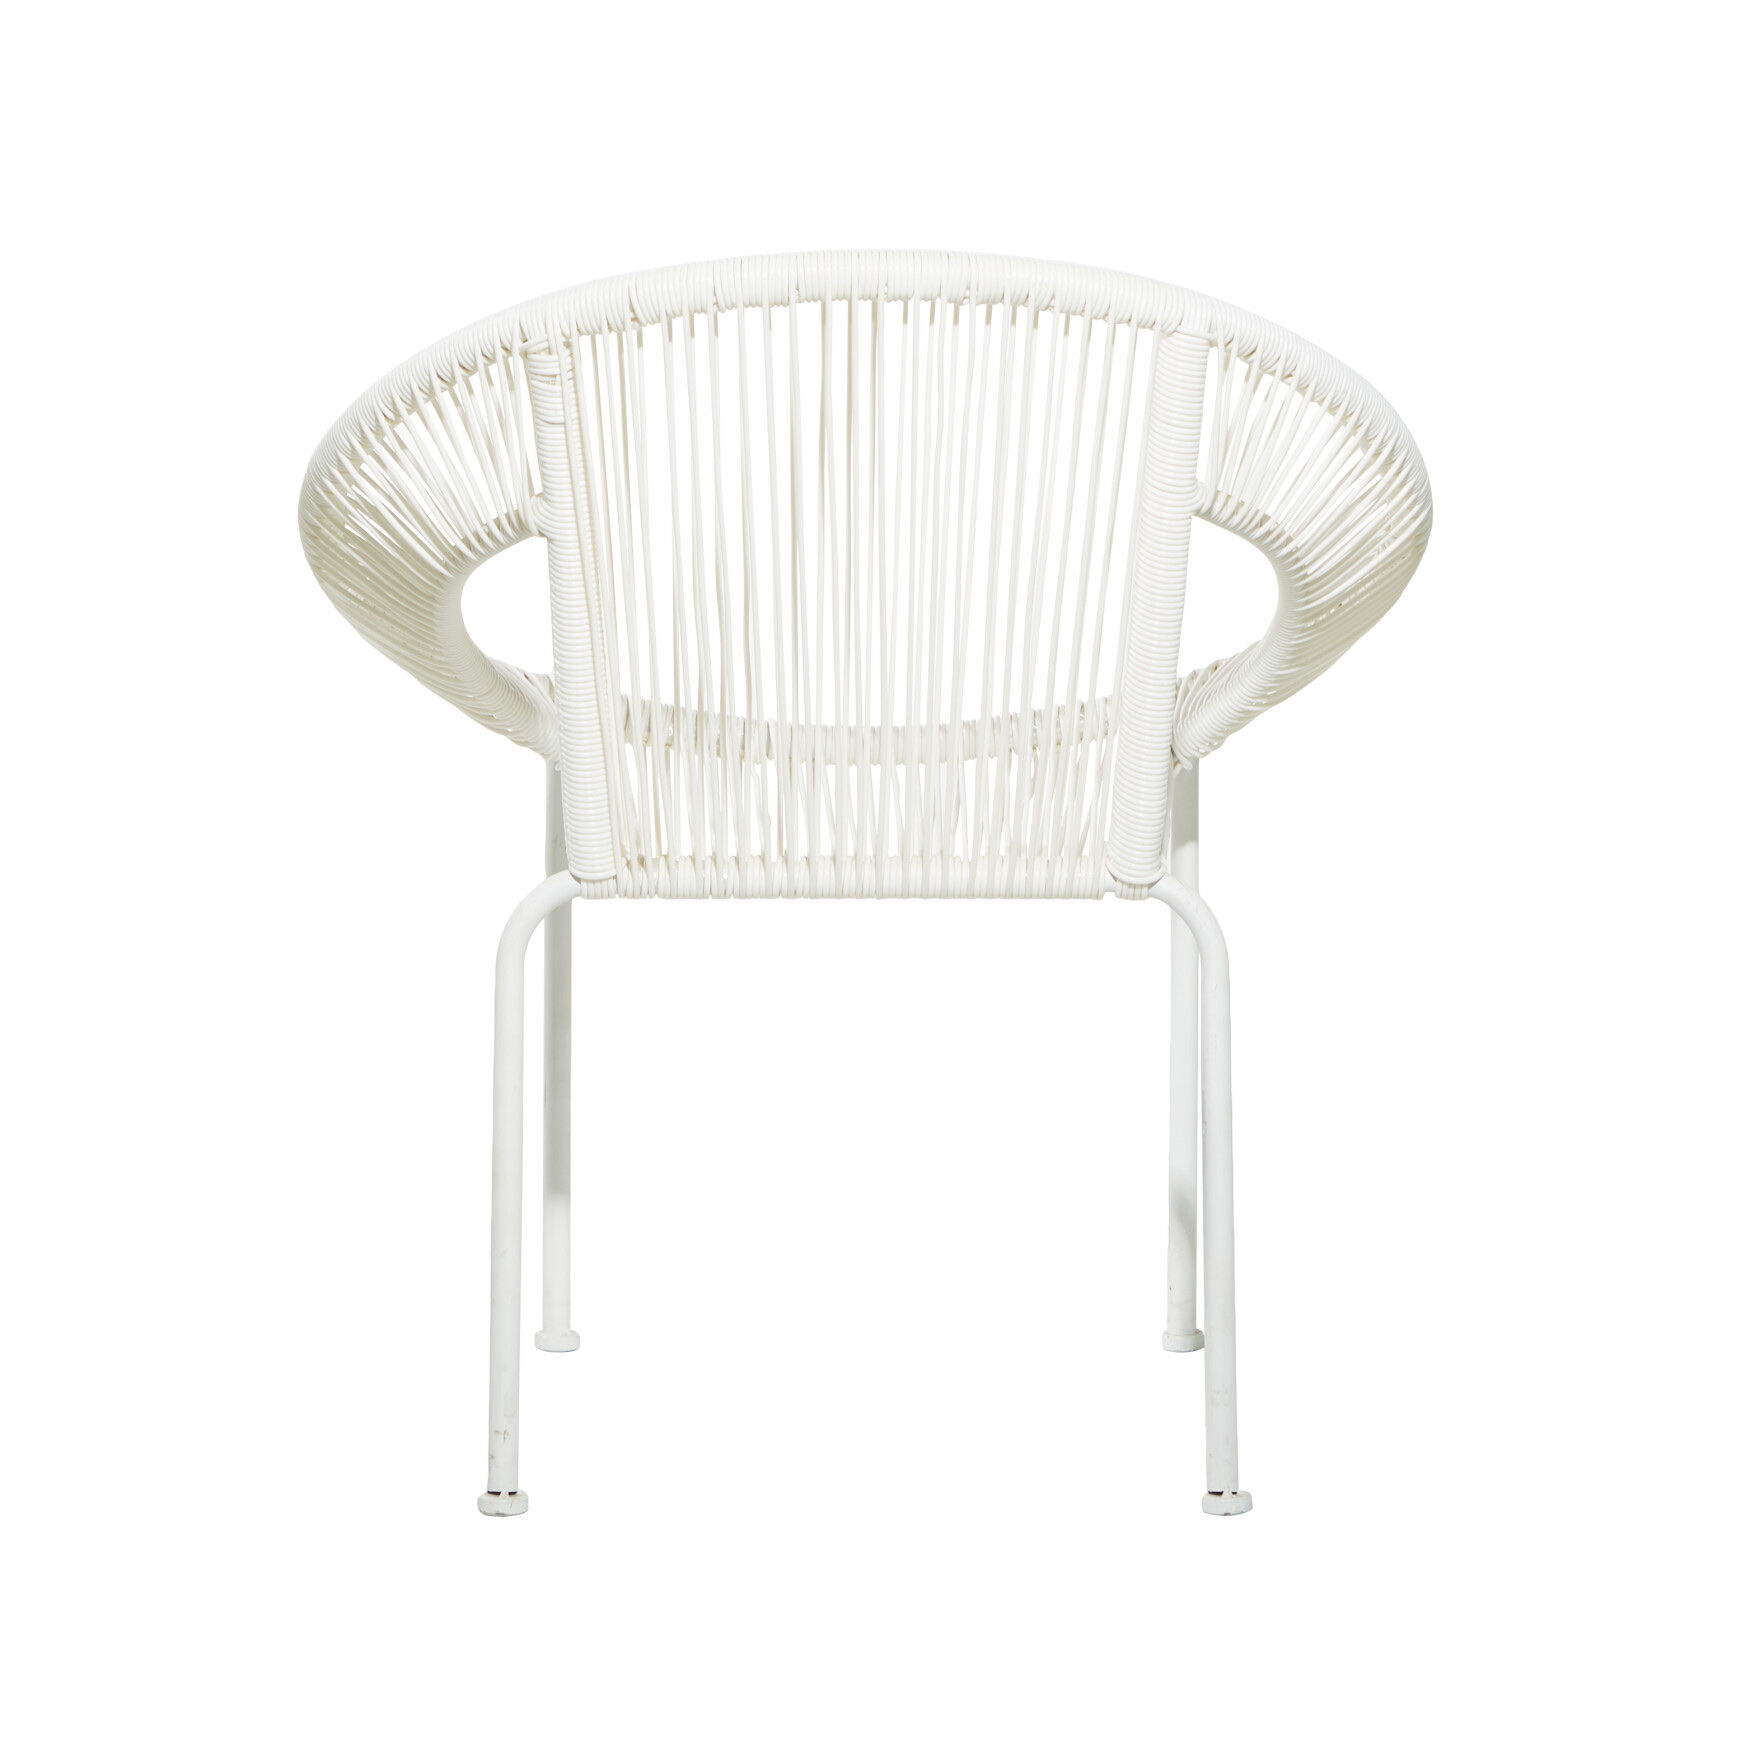 White Metal Contemporary Outdoor Chair | Brylane Home